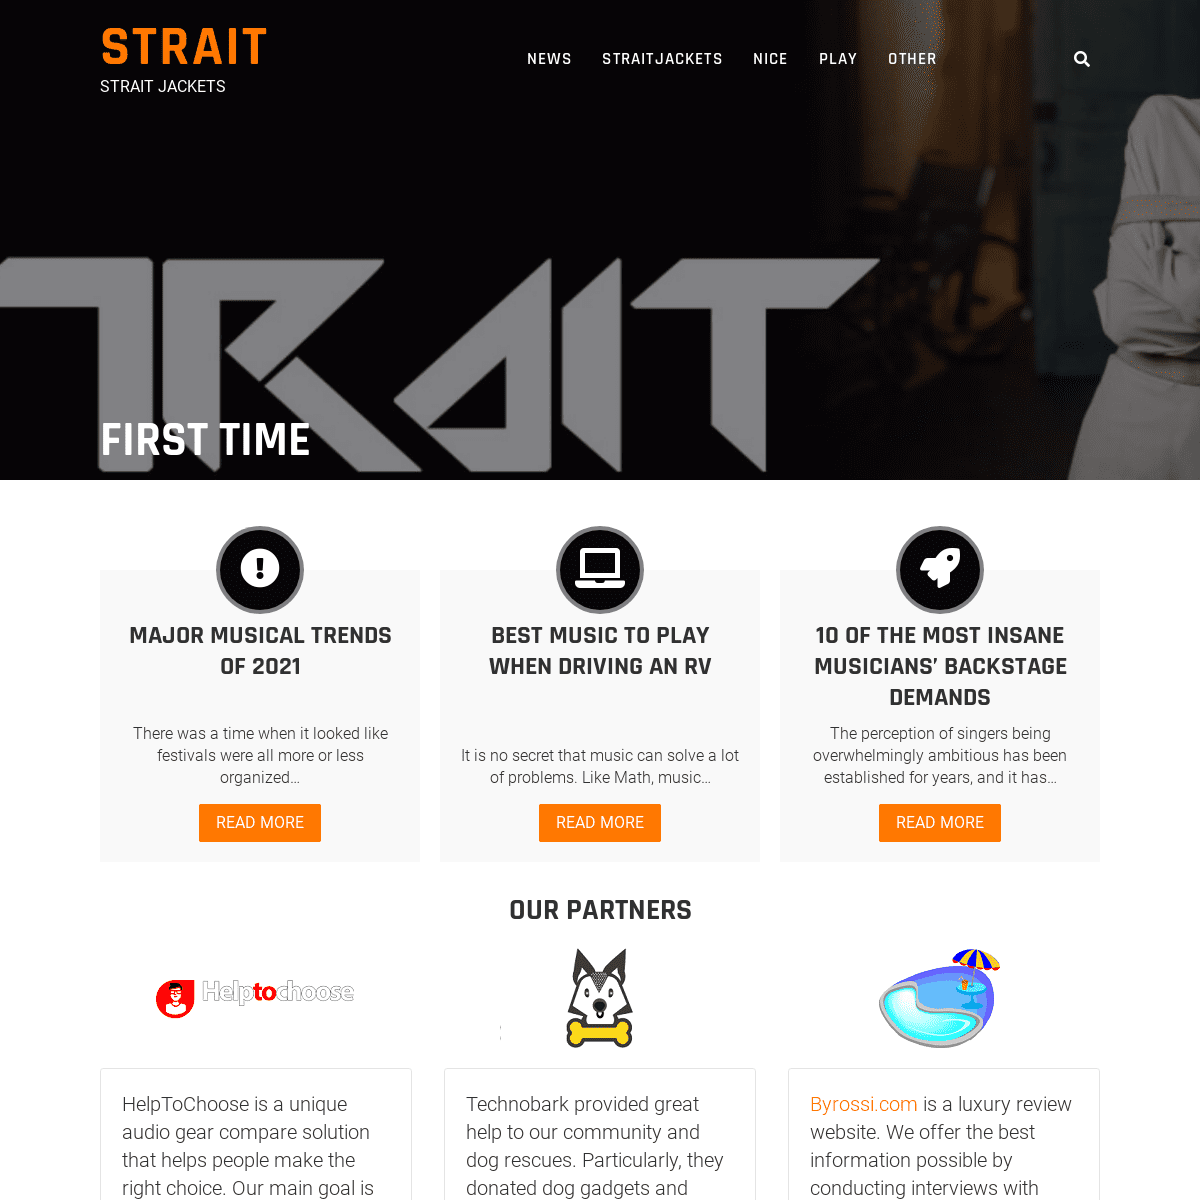 A complete backup of https://straitjackets.com